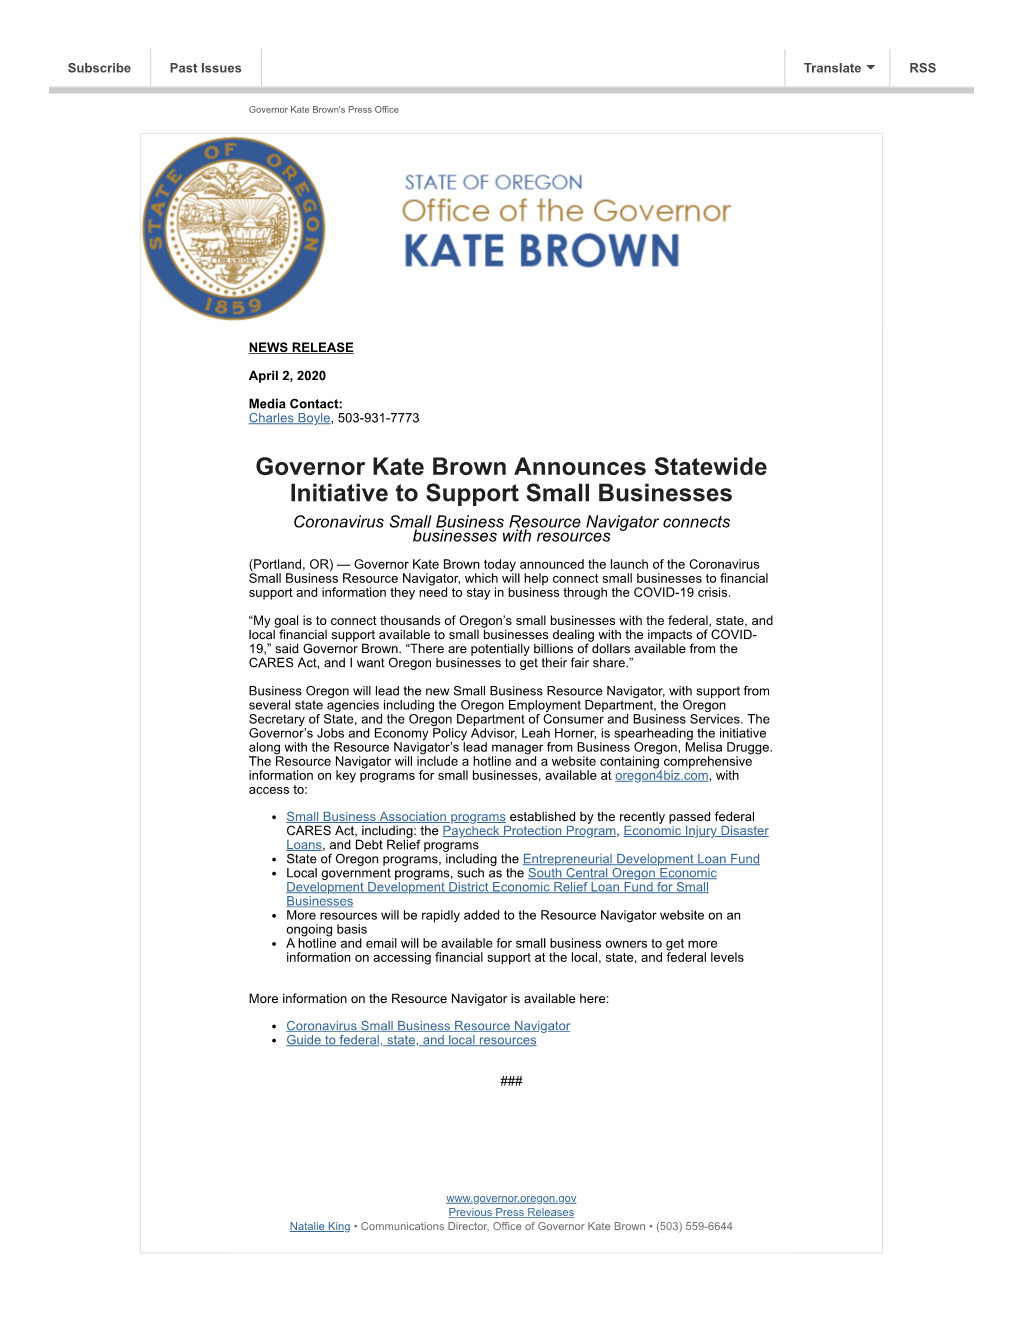 Governor Kate Brown Announces Statewide Initiative to Support Small Businesses Coronavirus Small Business Resource Navigator Connects Businesses with Resources